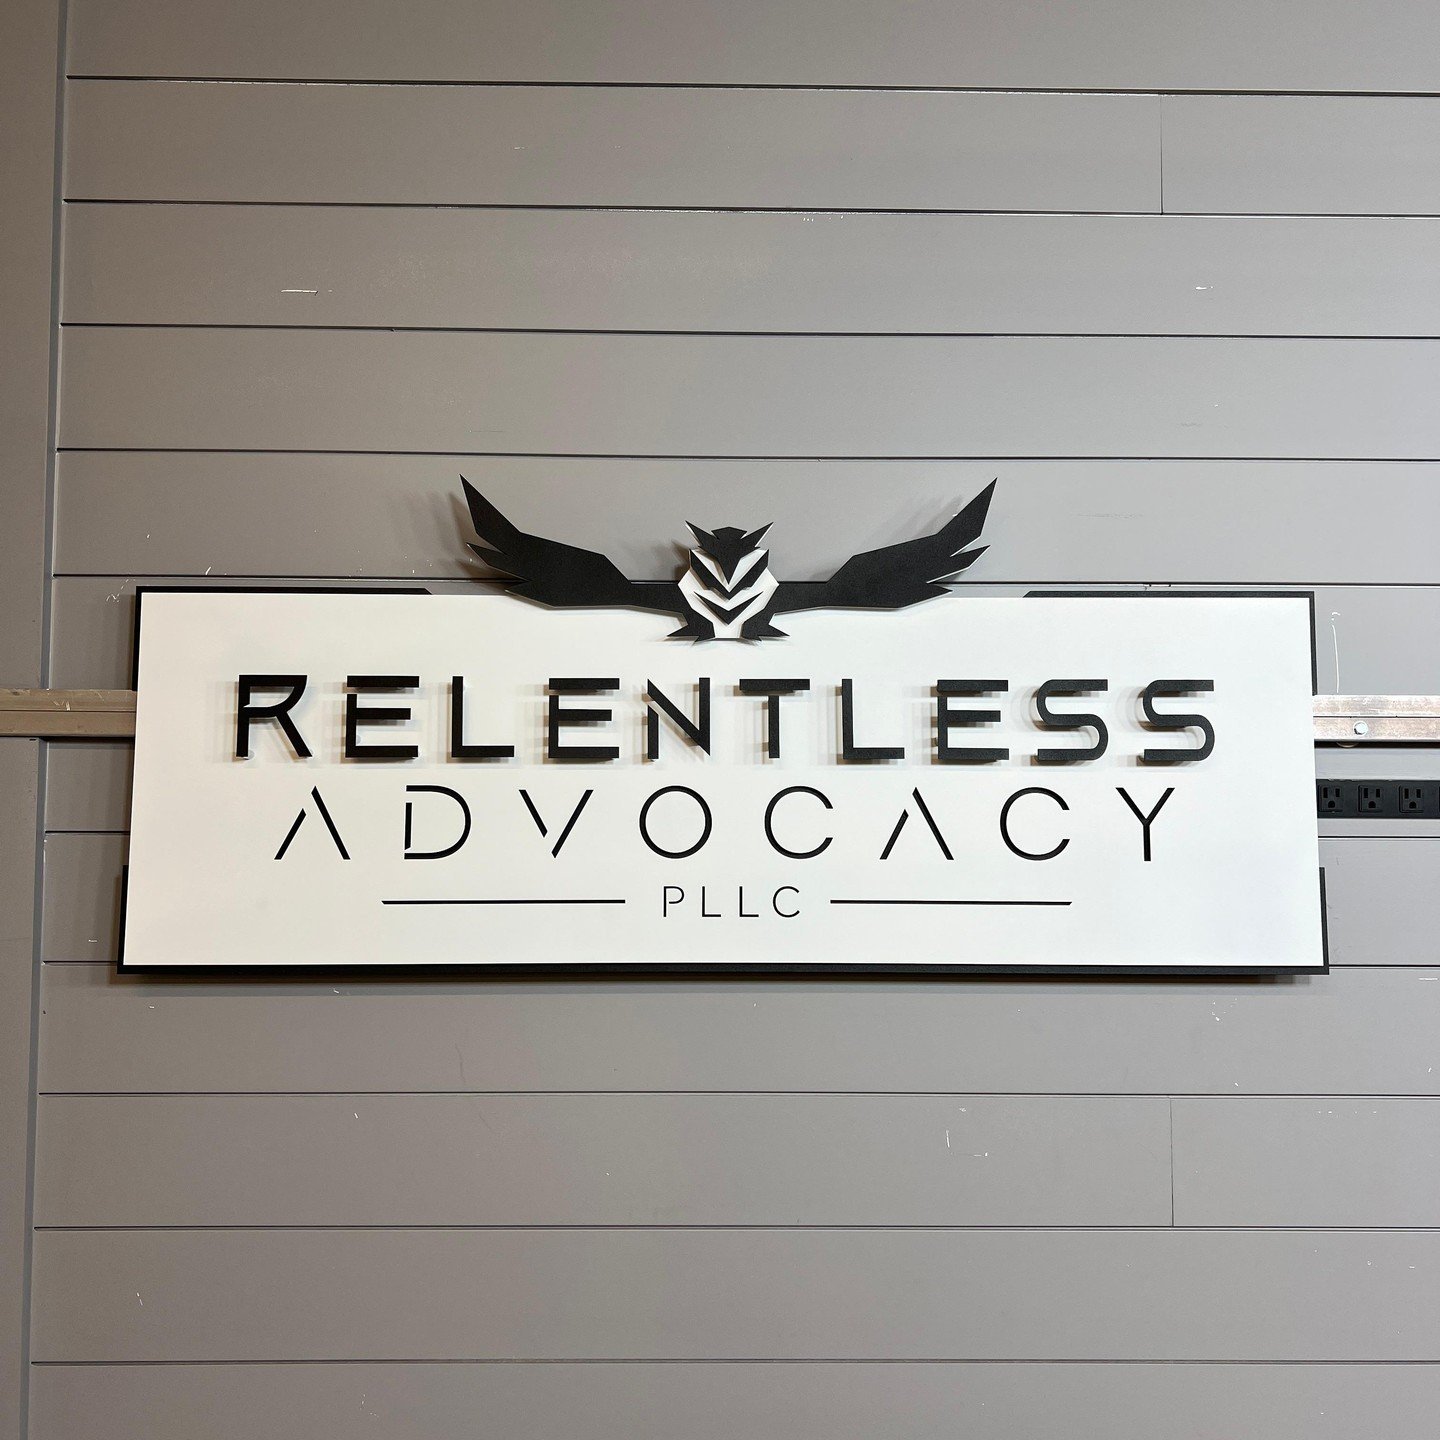 Today we're showcasing a sign we created recently for Relentless Advocacy PLLC in Brentwood, Tennessee.  The featured sign is one example of our modern black on white look. This sign is a perfect example of how we can turn your logo into art!

Lookin